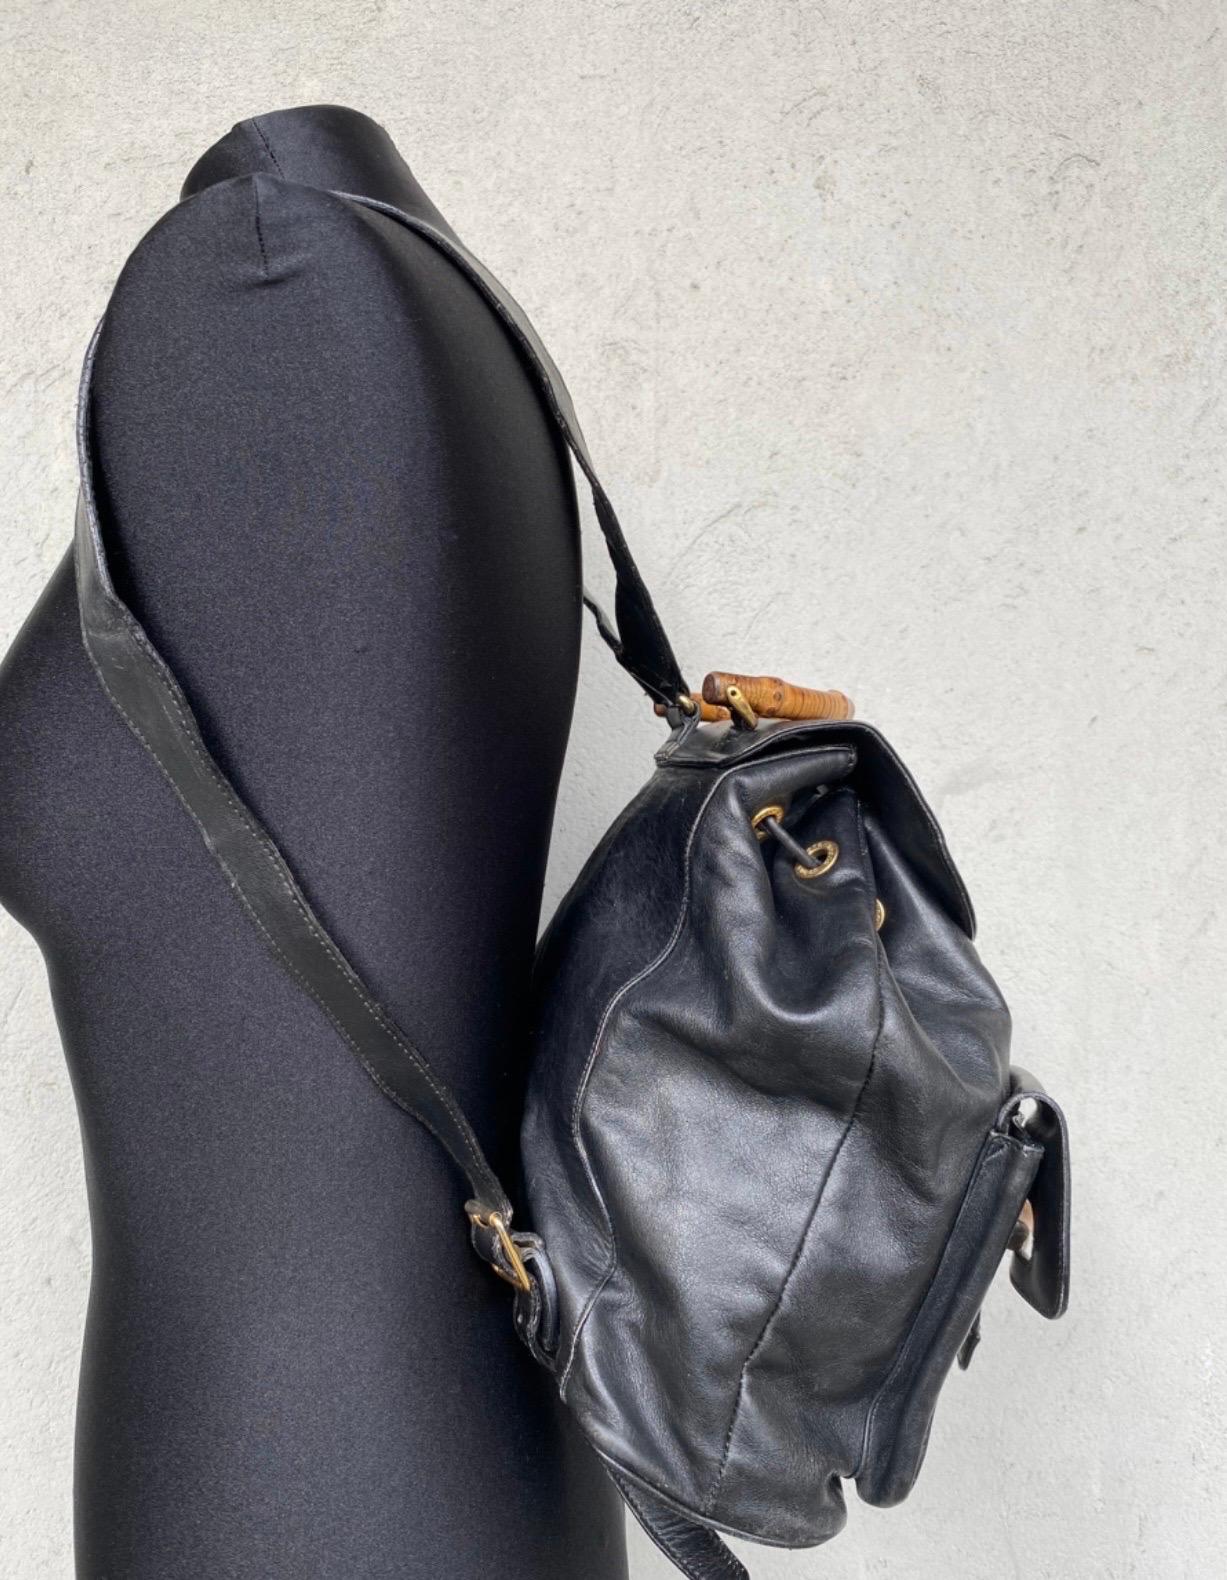 Vintage Gucci Bamboo backpack, in black leather, there are 2 pockets on the front, it features a double closure. dimensions: length 32 cm, height 34 cm, depth 11 cm when empty, handle height 7 cm, shoulder strap 67 cm, used but in good condition